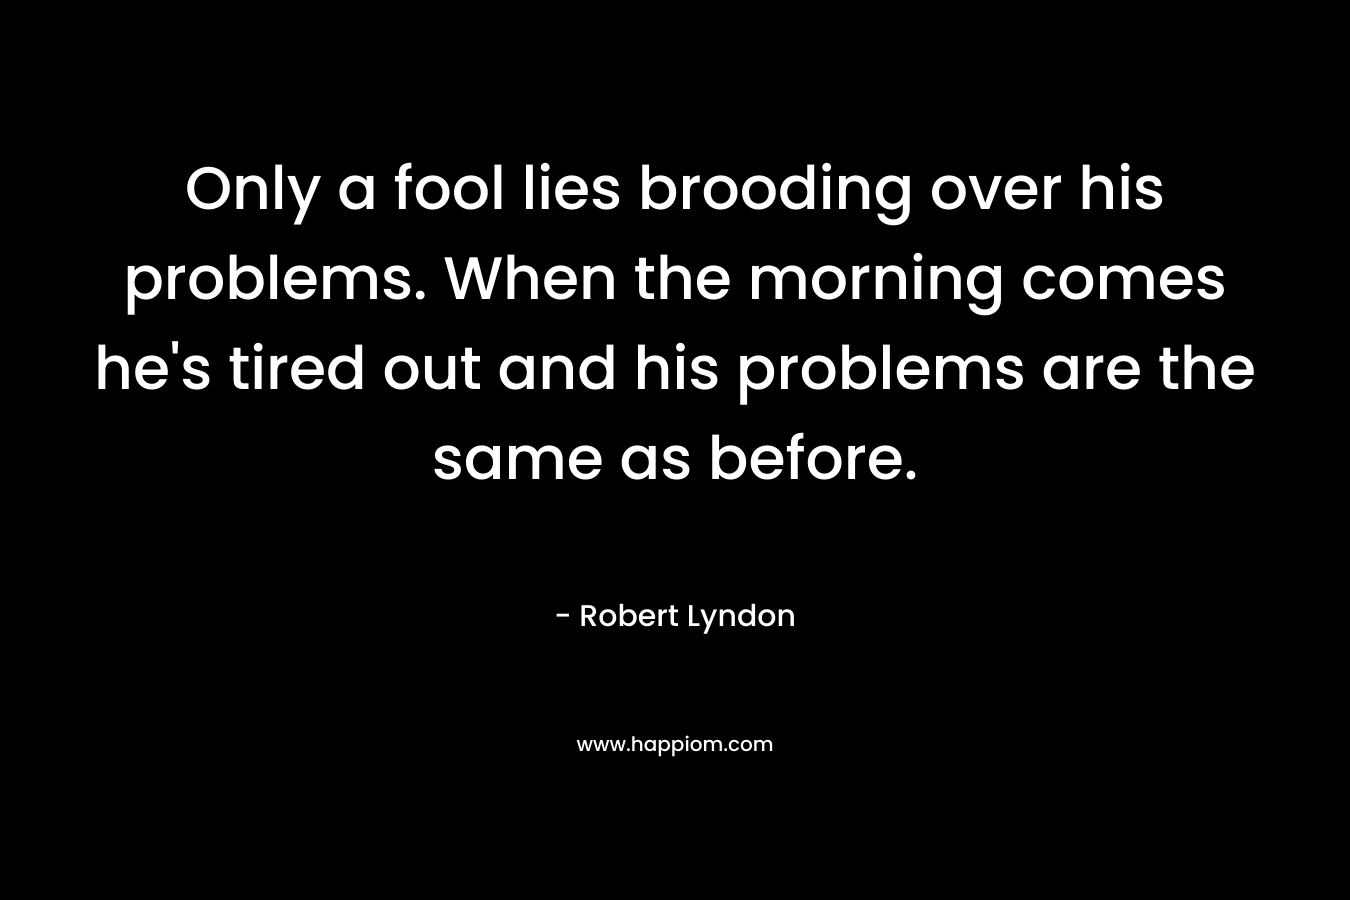 Only a fool lies brooding over his problems. When the morning comes he's tired out and his problems are the same as before.